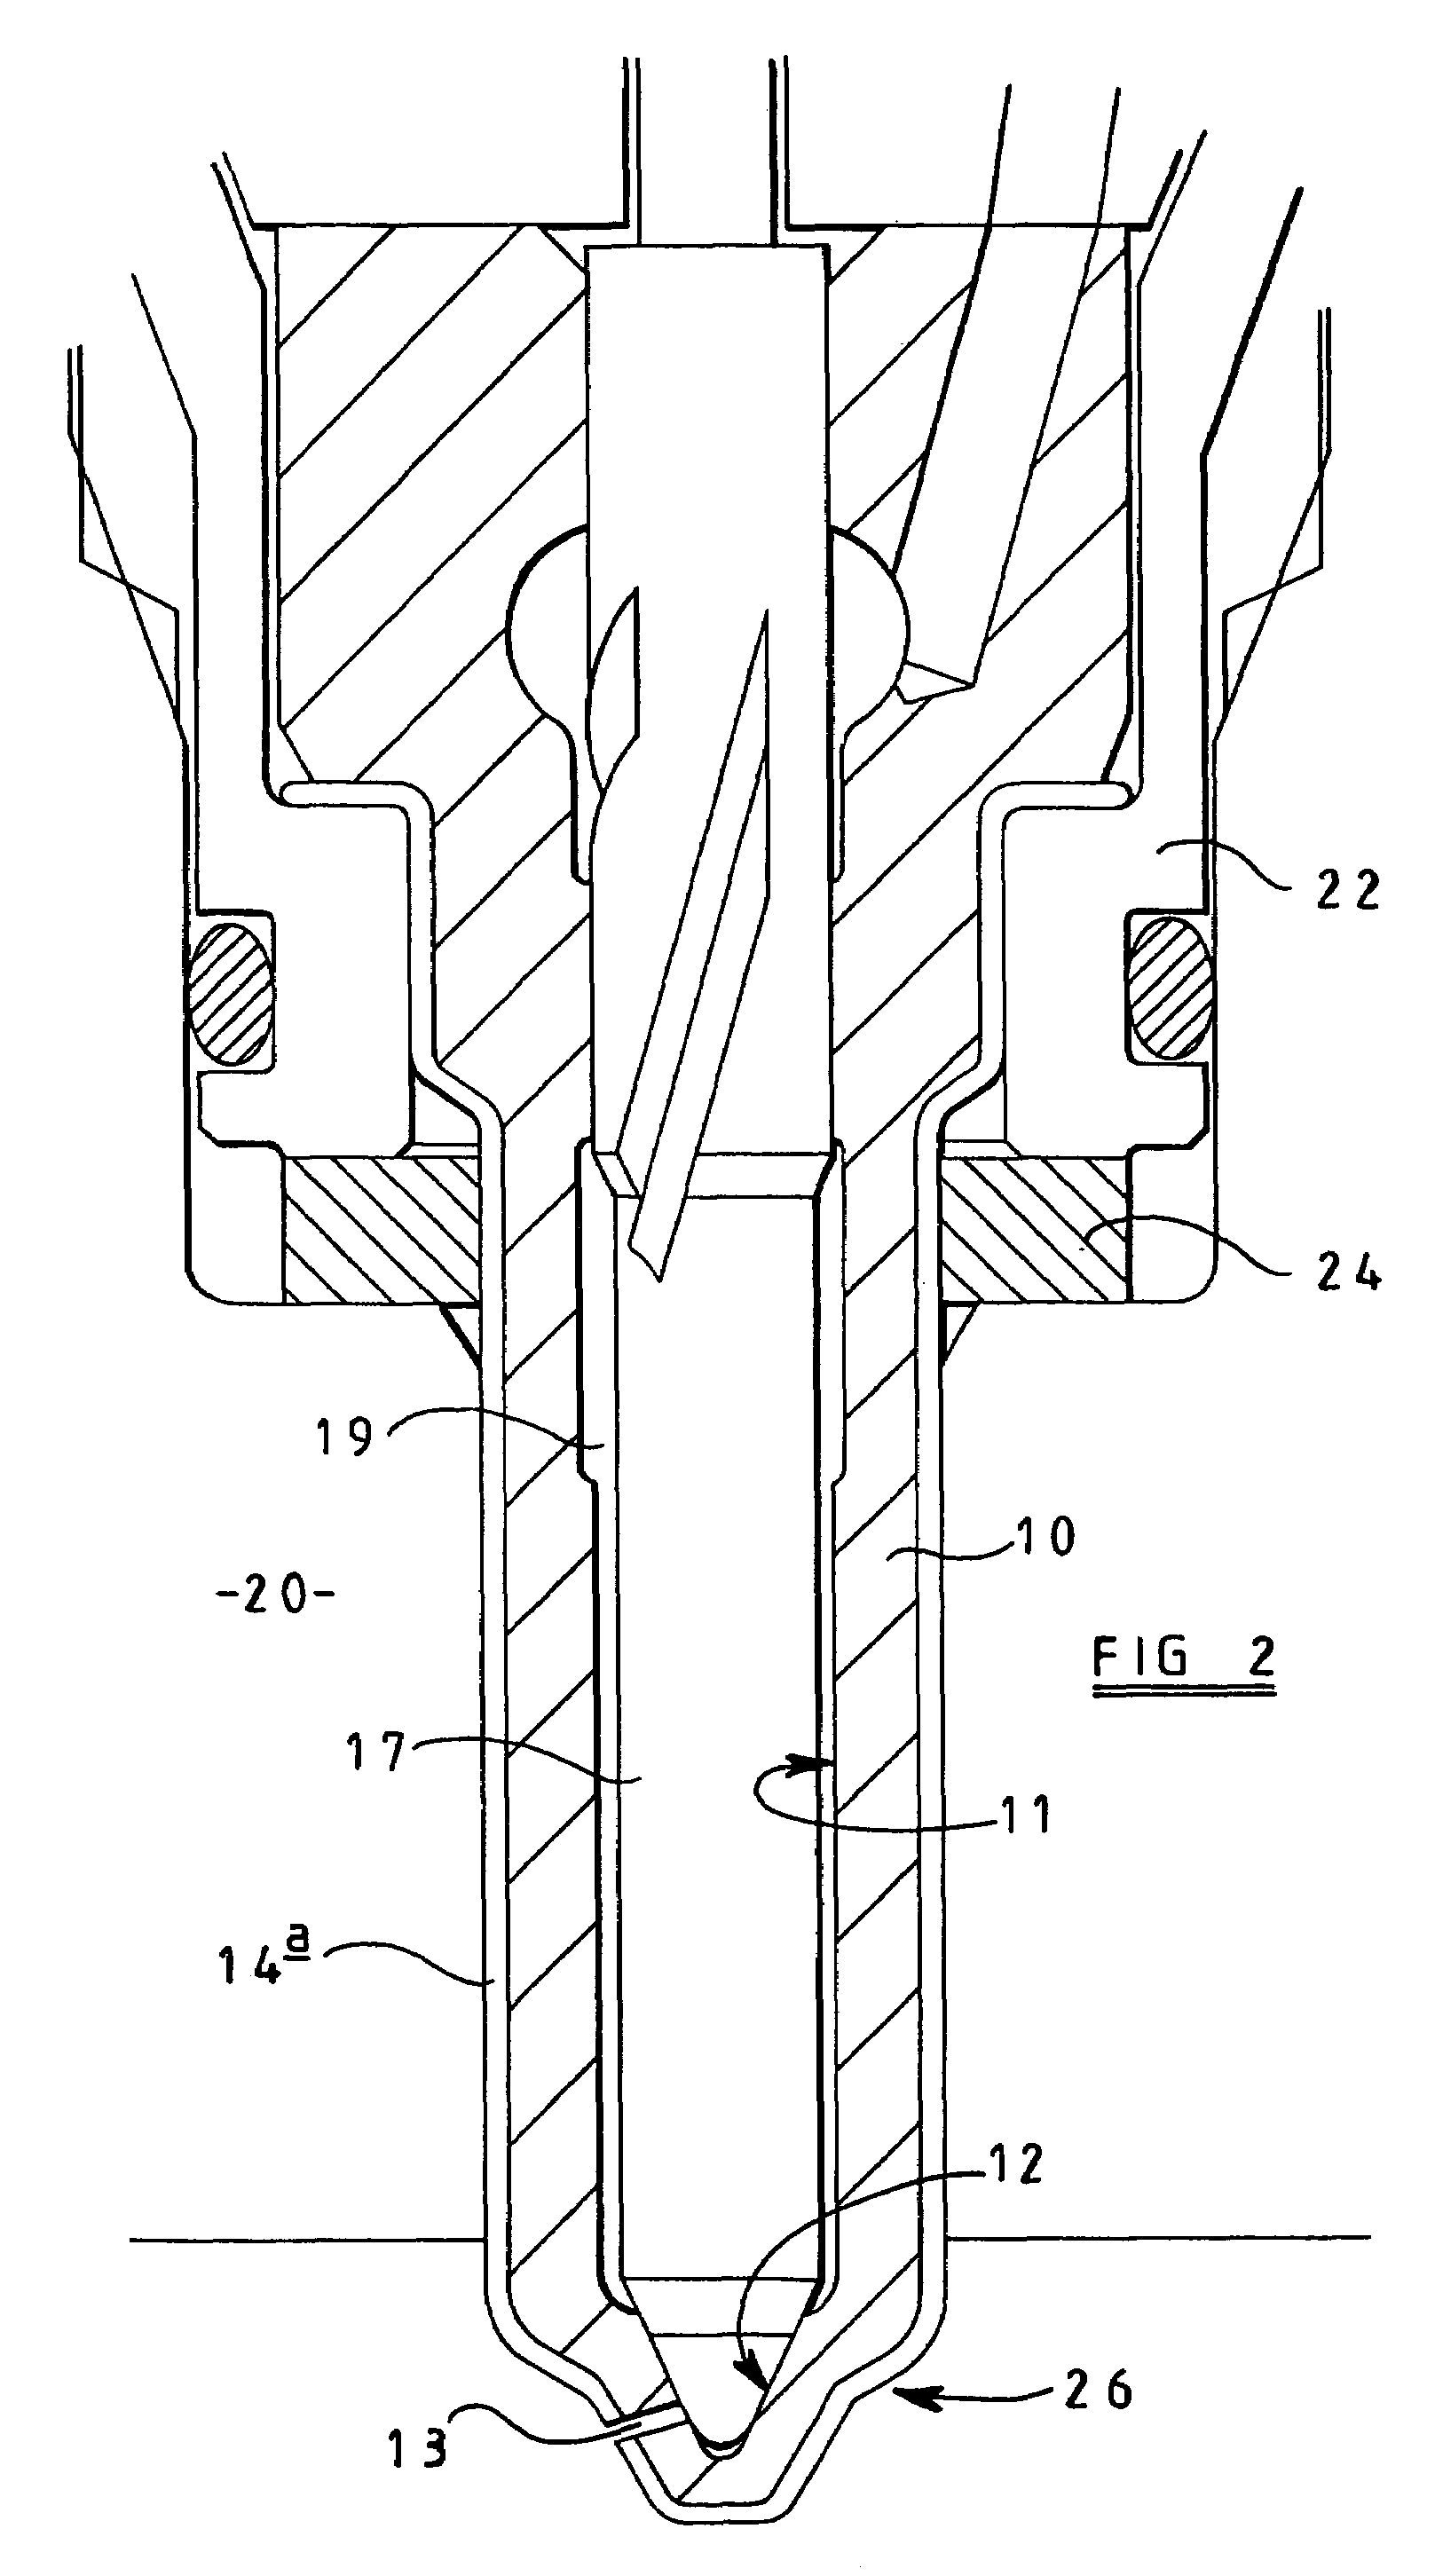 Injection nozzle